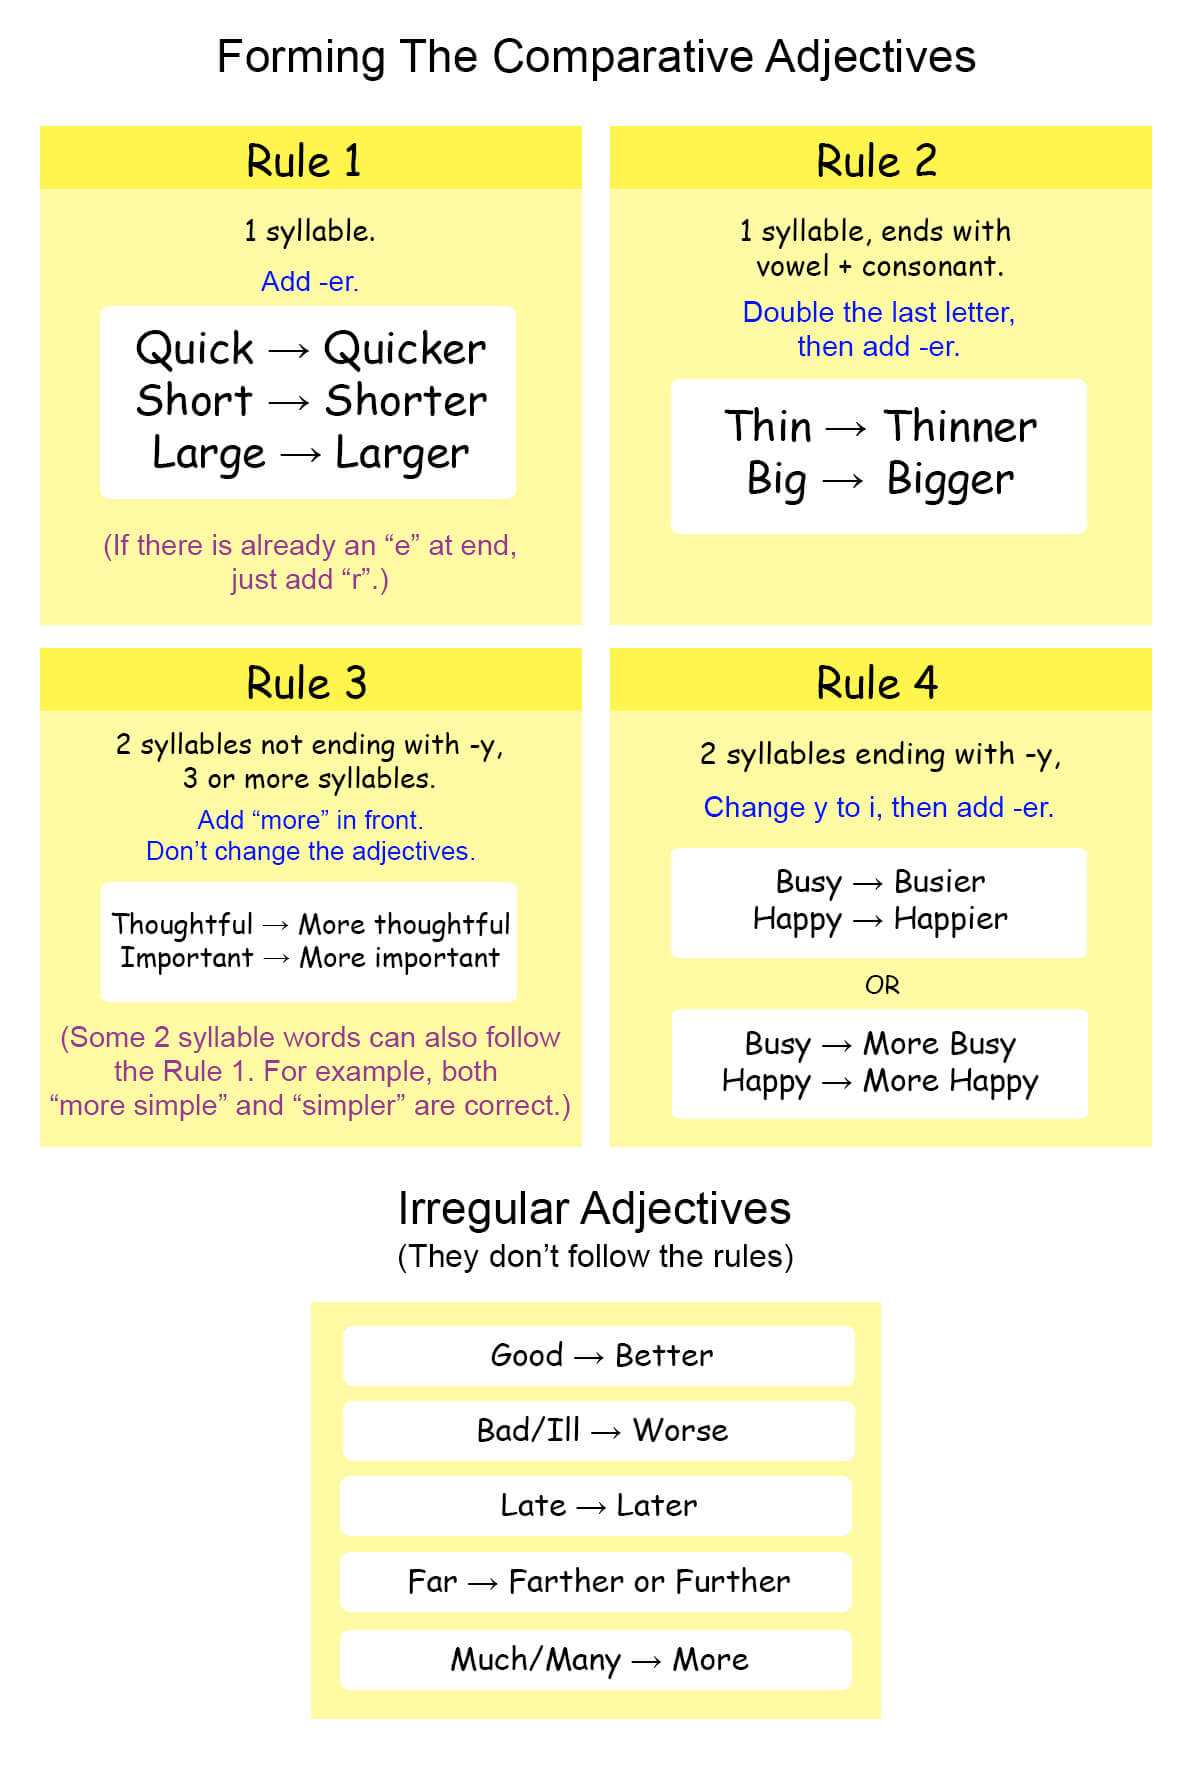 Rule chart for forming comparative adjectives